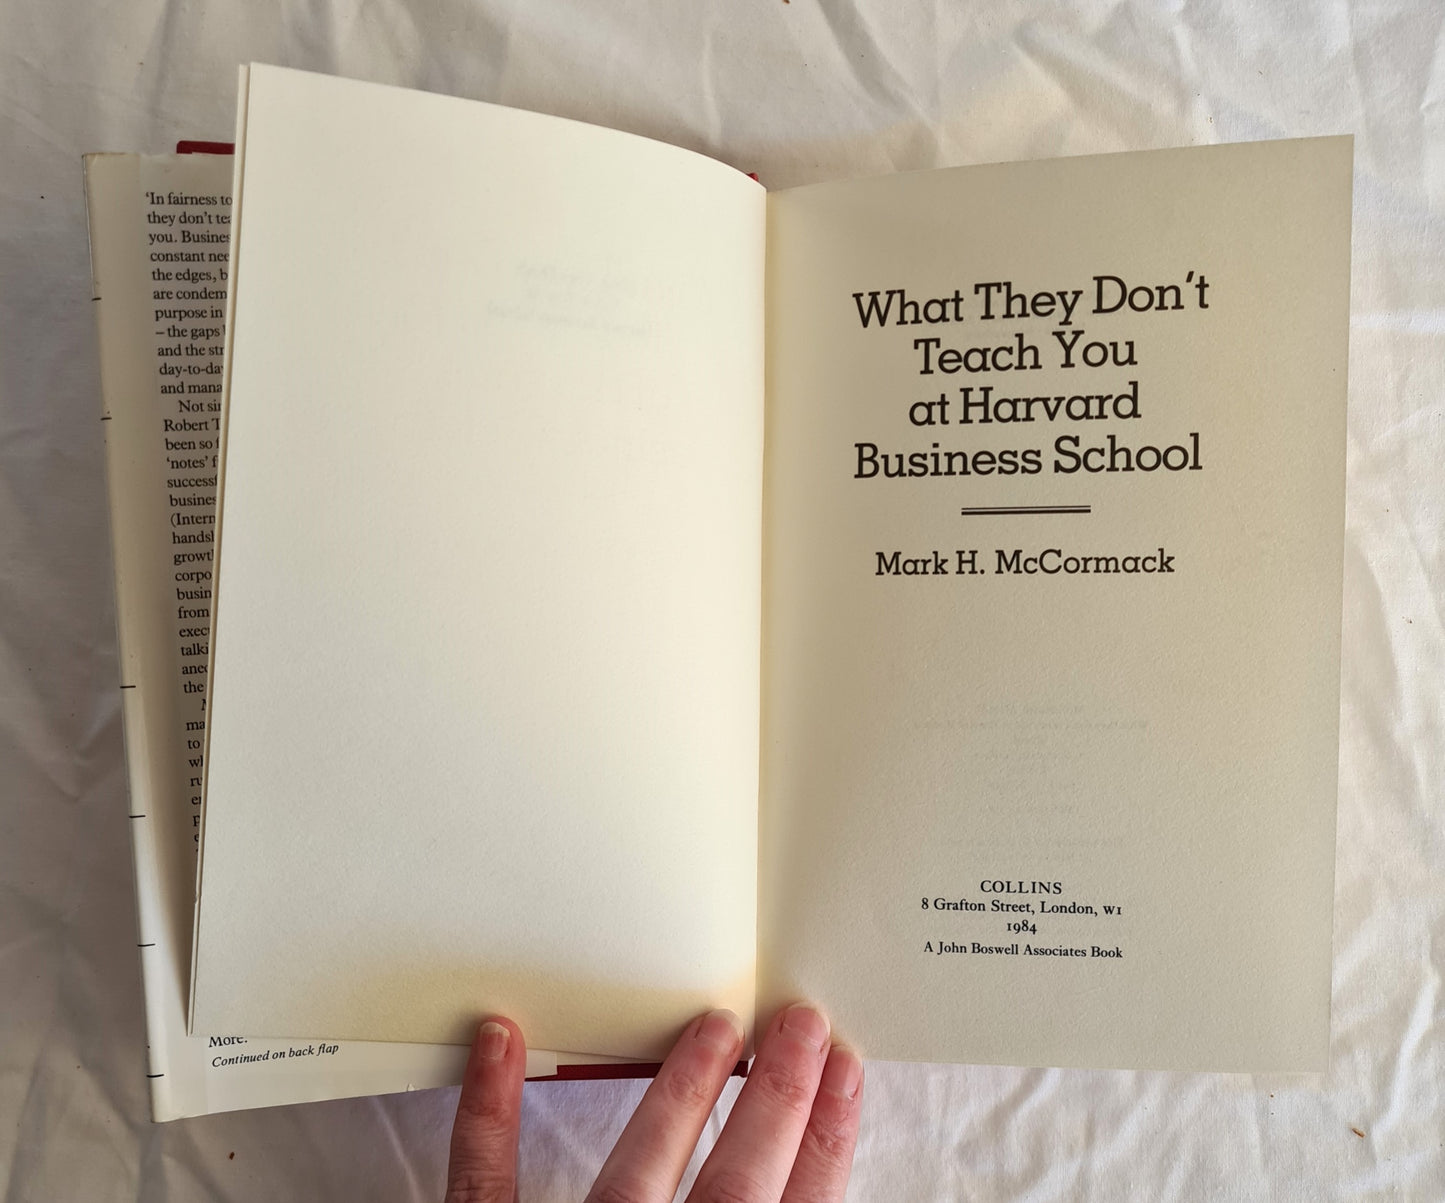 What They Don’t Teach You at Harvard Business School by Mark H. McCormack